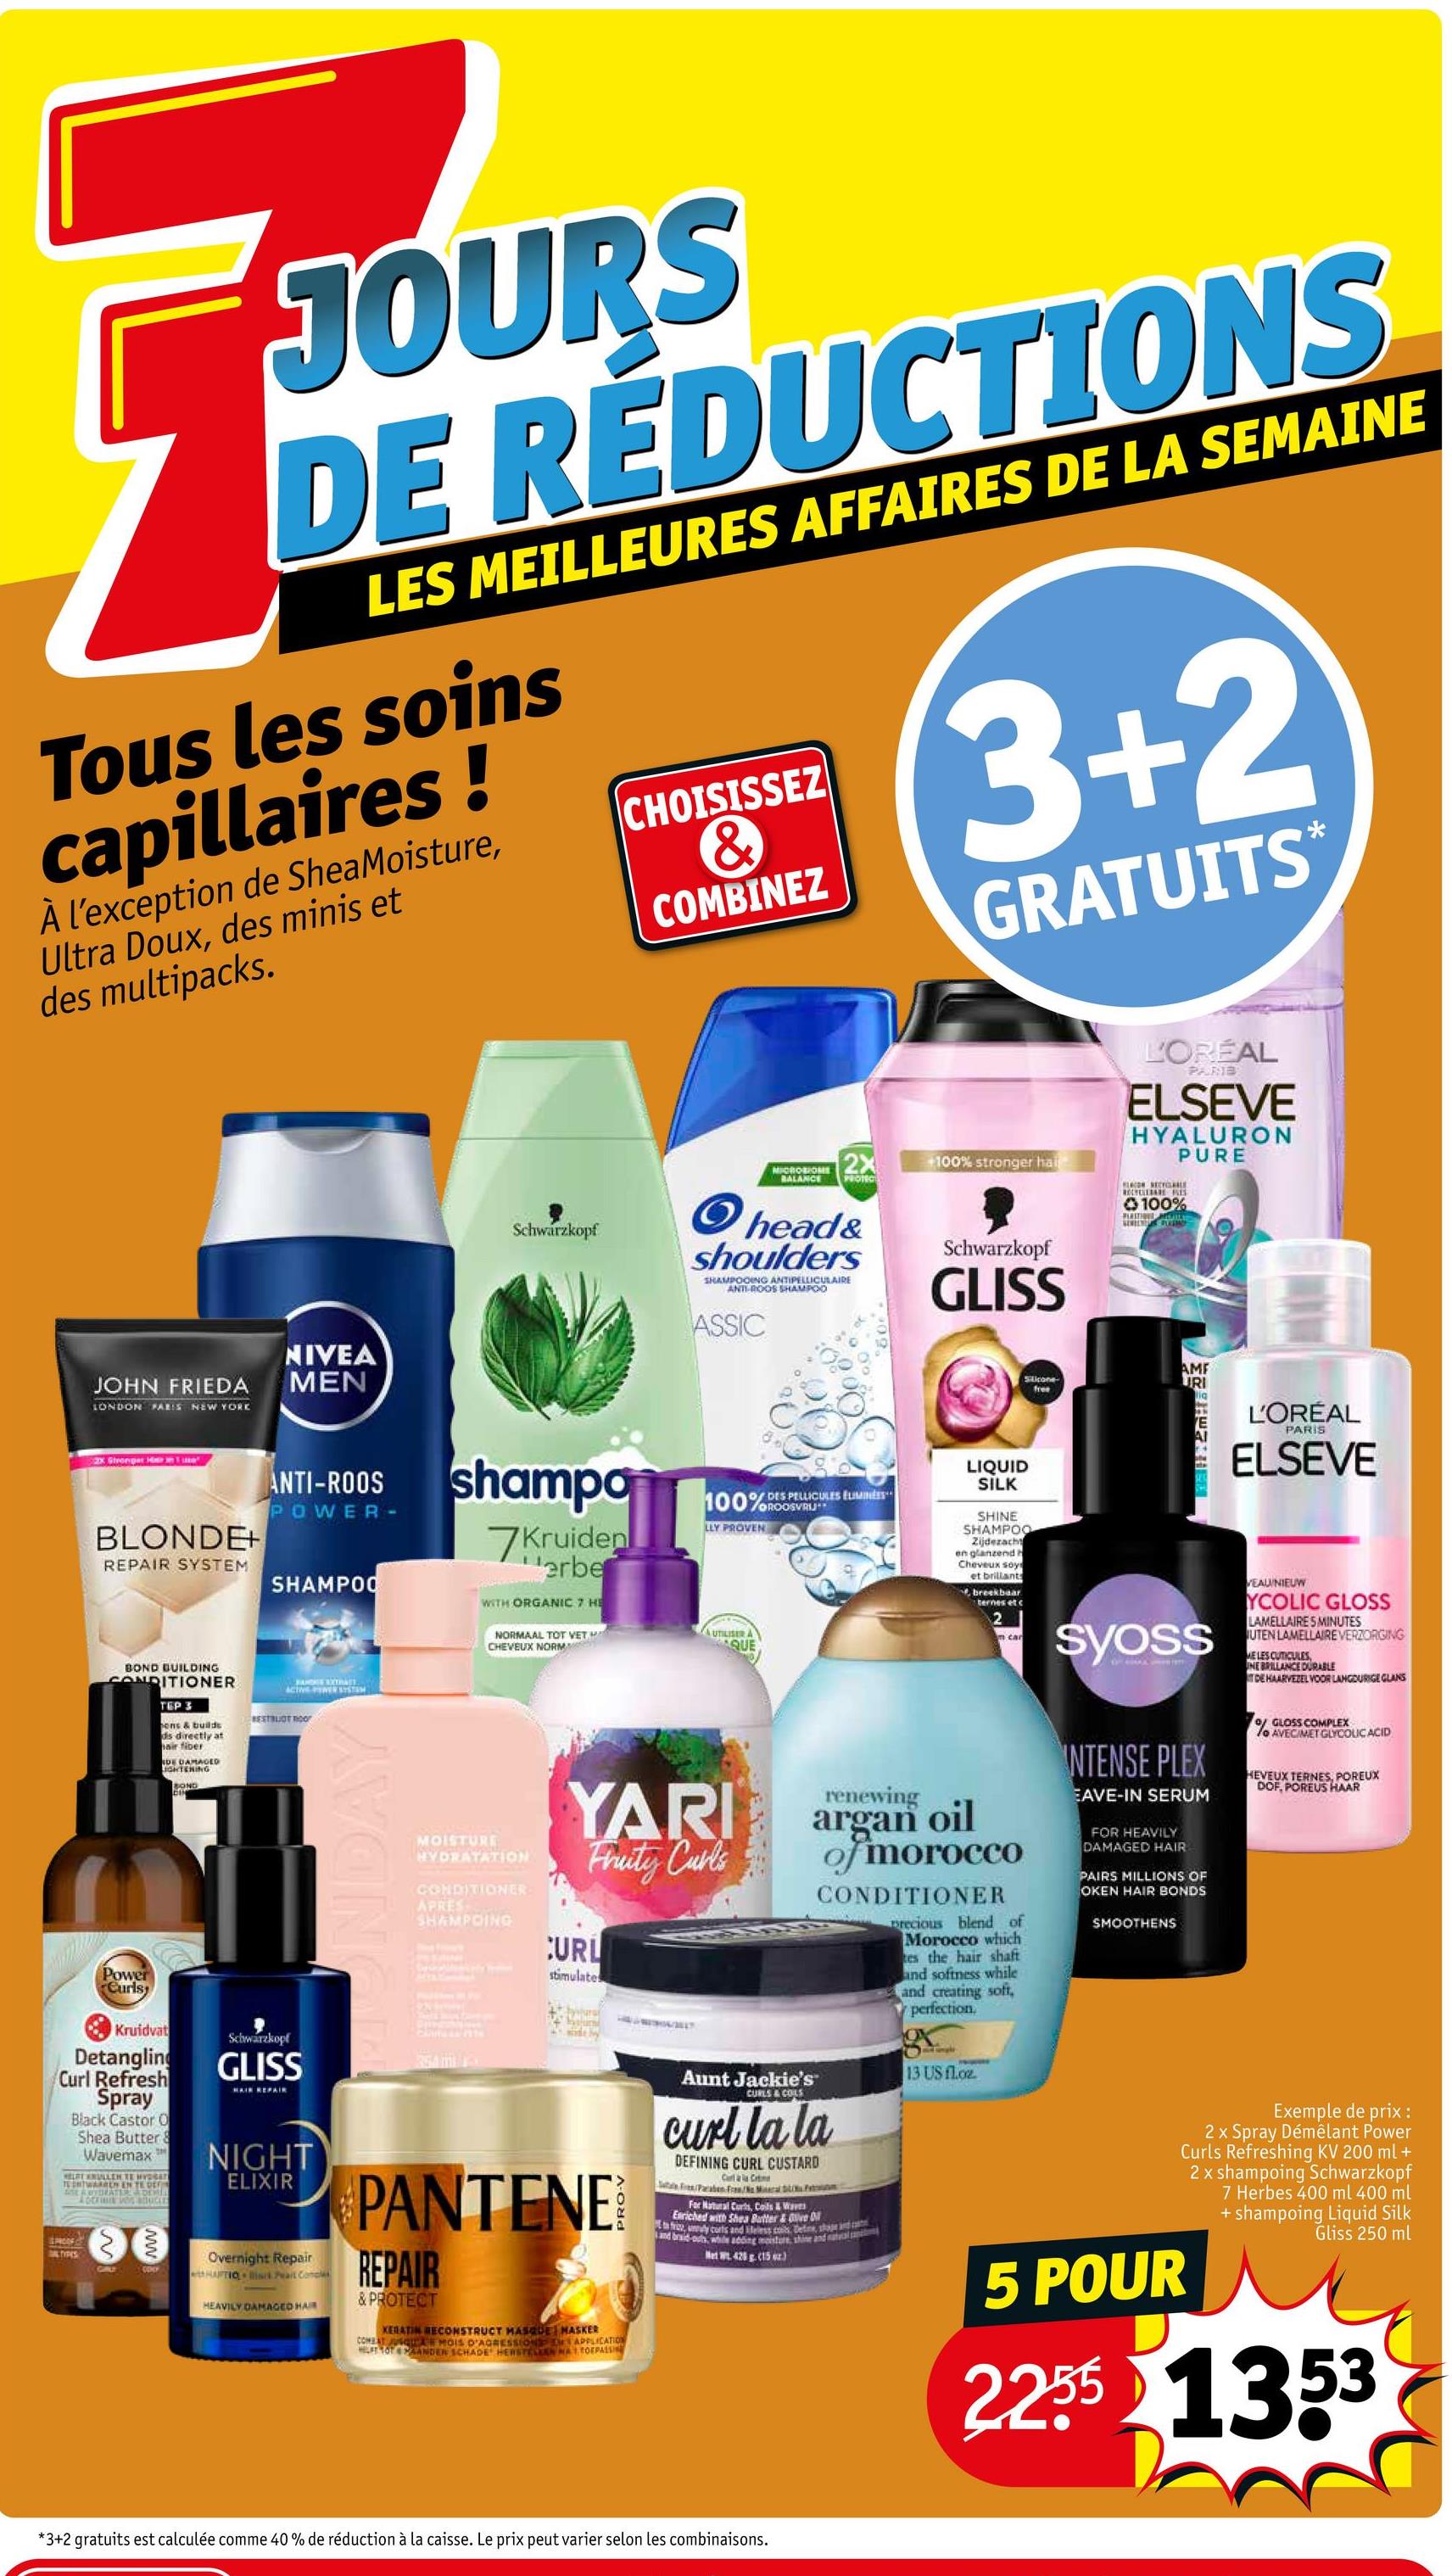 JOURS
DE REDUCTIONS
LES MEILLEURES AFFAIRES DE LA SEMAINE
Tous les soins
capillaires!
À l'exception de SheaMoisture,
Ultra Doux, des minis et
des multipacks.
CHOISISSEZ
3+2
&
COMBINEZ
GRATUITS
Schwarzkopf
2X
MICROBIOME
BALANCE PROTECT
+100% stronger hai
L'ORÉAL
PARIS
ELSEVE
HYALURON
PURE
FLACON RECYCLE
100%
head&
shoulders
SHAMPOOING ANTIPELLICULAIRE
ANTI-ROOS SHAMPOO
ASSIC
Schwarzkopf
GLISS
JOHN FRIEDA
LONDON PARIS NEW YORK
NIVEA
MEN
2x Stronger Hu
BLONDE+
REPAIR SYSTEM
ANTI-ROOS
POWER-
SHAMPOO
BOND BUILDING
CONDITIONER
TEP 3
ens & builds
ds directly at
hair fiber
DE DAMAGED
JIGHTERING
BOND
DIN
HANDRE EXTINCT
ACING SYSTEM
BESTRUOT noor
Power
Curls
shampo
7Kruiden
erbe
WITH ORGANIC 7 HE
NORMAAL TOT VET
CHEVEUX NORM
MOISTURE
HYDRATATION
CONDITIONER
APRES
SHAMPOING
100%ROOSVRU
ODES PELLICULES ELIMINES
LLY PROVEN
UTILISER A
QUE
YARI
Fruity Curls
CURL
stimulate
LIQUID
SILK
Silicone
free
SHINE
SHAMPOO
Zijdezacht
en glanzend h
Cheveux soy
et brillants
breekbaar
ternes et c
m car
renewing
argan oil
of morocco
CONDITIONER
precious blend of
Morocco which
tes the hair shaft
and softness while
and creating soft,
perfection.
URI
STEFRIEN
AME
L'ORÉAL
PARIS
ELSEVE
syoss
INTENSE PLEX
EAVE-IN SERUM
FOR HEAVILY
DAMAGED HAIR
PAIRS MILLIONS OF
OKEN HAIR BONDS
SMOOTHENS
VEAU/NIEUW
YCOLIC GLOSS
LAMELLAIRE 5 MINUTES
UTEN LAMELLAIRE VERZORGING
ME LES CUTICULES
INE BRILLANCE DURABLE
DE HAARVEZEL VOOR LANGDURIGE GLANS
of GLOSS COMPLEX
fo AVEC/MET GLYCOLIC ACID
HEVEUX TERNES, POREUX
DOF, POREUS HAAR
Kruidvat
Detangling
Curl Refresh
Spray
Black Castor O
Shea Butter &
Wavemax
TE ENTWARREN EN TE DE
ADRIAN VORTUGEES
Schwarzkopf
GLISS
NIGHT
ELIXIR
DALTYPES
www.
CDNY
Overnight Repair
HAFTIO is Peart Concle
HEAVILY DAMAGED HAR
354 mi
PANTENE
REPAIR
& PROTECT
KERATIN RECONSTRUCT MASQUE MASKER
COMBAT JUSQU MOIS D'AGRESSION
APPLICATION
WFT TOT PANDER SCHADE HERSTELLAN MATTOEPASS
Aunt Jackie's
CURLS & COILS
curl la la
DEFINING CURL CUSTARD
Carl a la Crime
Pacaben Fr/No Meal D
For Natural Corts, Coils & Waves
Enriched with Shea Butter & Dive D
ta frico, unly curts and leless cools, Define, shape and ca
and braid-ouths, while adding moisture, shine and natal
Met W 425 g (15)
13 US floz
Exemple de prix :
2 x Spray Démêlant Power
Curls Refreshing KV 200 ml +
2 x shampoing Schwarzkopf
7 Herbes 400 ml 400 ml
5 POUR
+ shampoing Liquid Silk
Gliss 250 ml
2255 1353
*3+2 gratuits est calculée comme 40% de réduction à la caisse. Le prix peut varier selon les combinaisons.